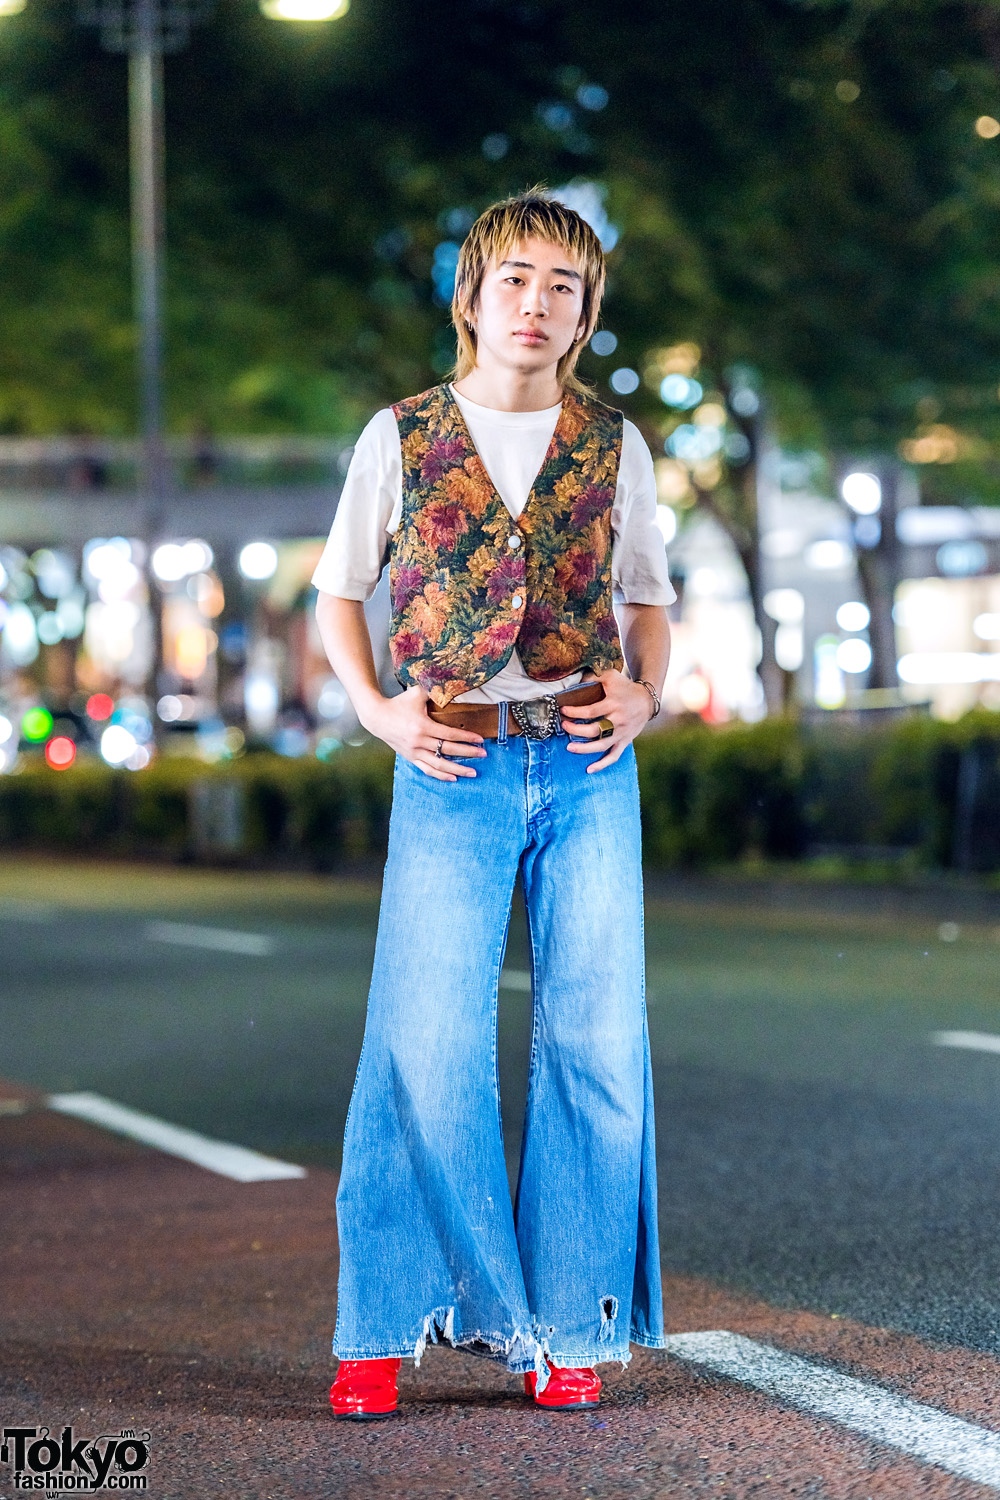 Harajuku Guy's Retro Vintage Street Fashion w/ Floral Vest, Flared Jeans, Beauty:Beast & Banal Chic Bizarre Heeled Boots